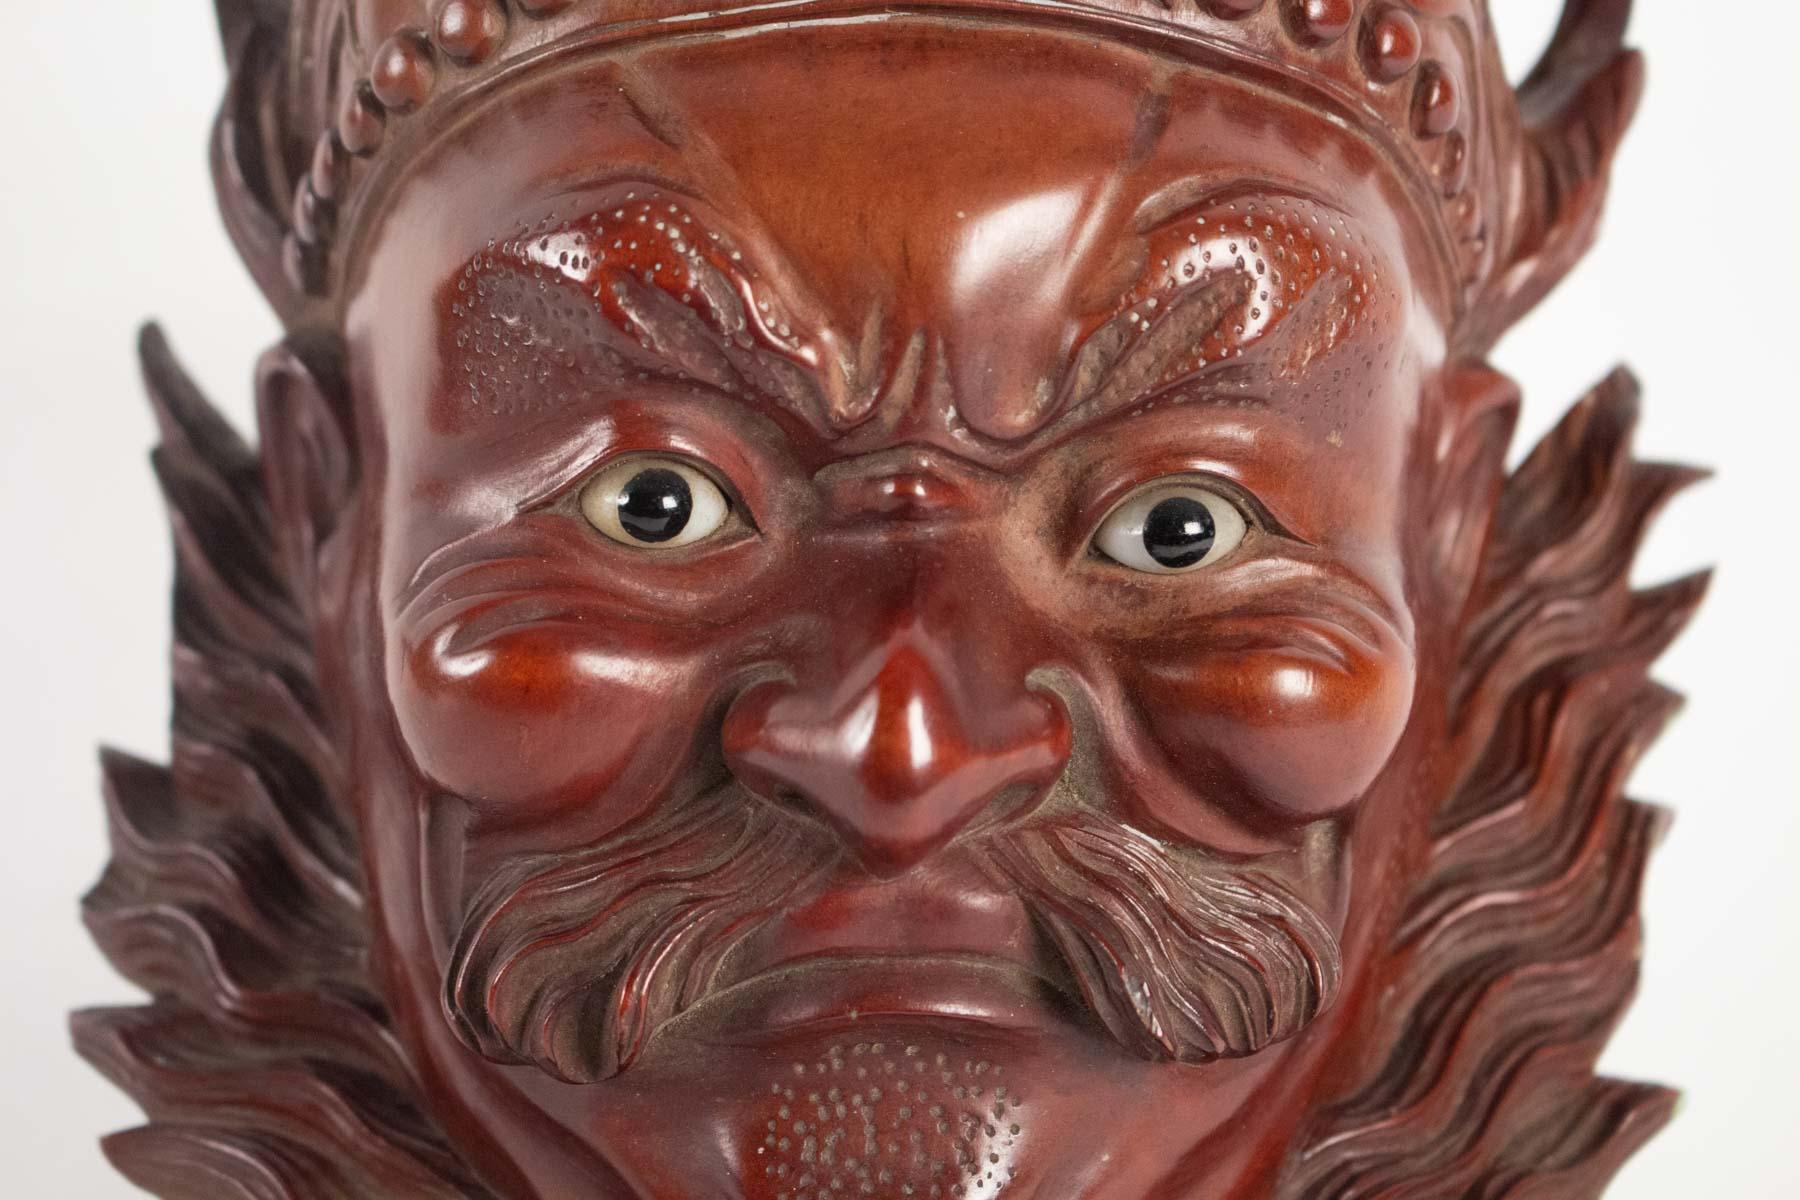 Wooden Mask of a Chinese Traditional Opera Personage, Sulfur Eyes, circa 1900
Measures: H 30cm, L 20cm, P 15cm.